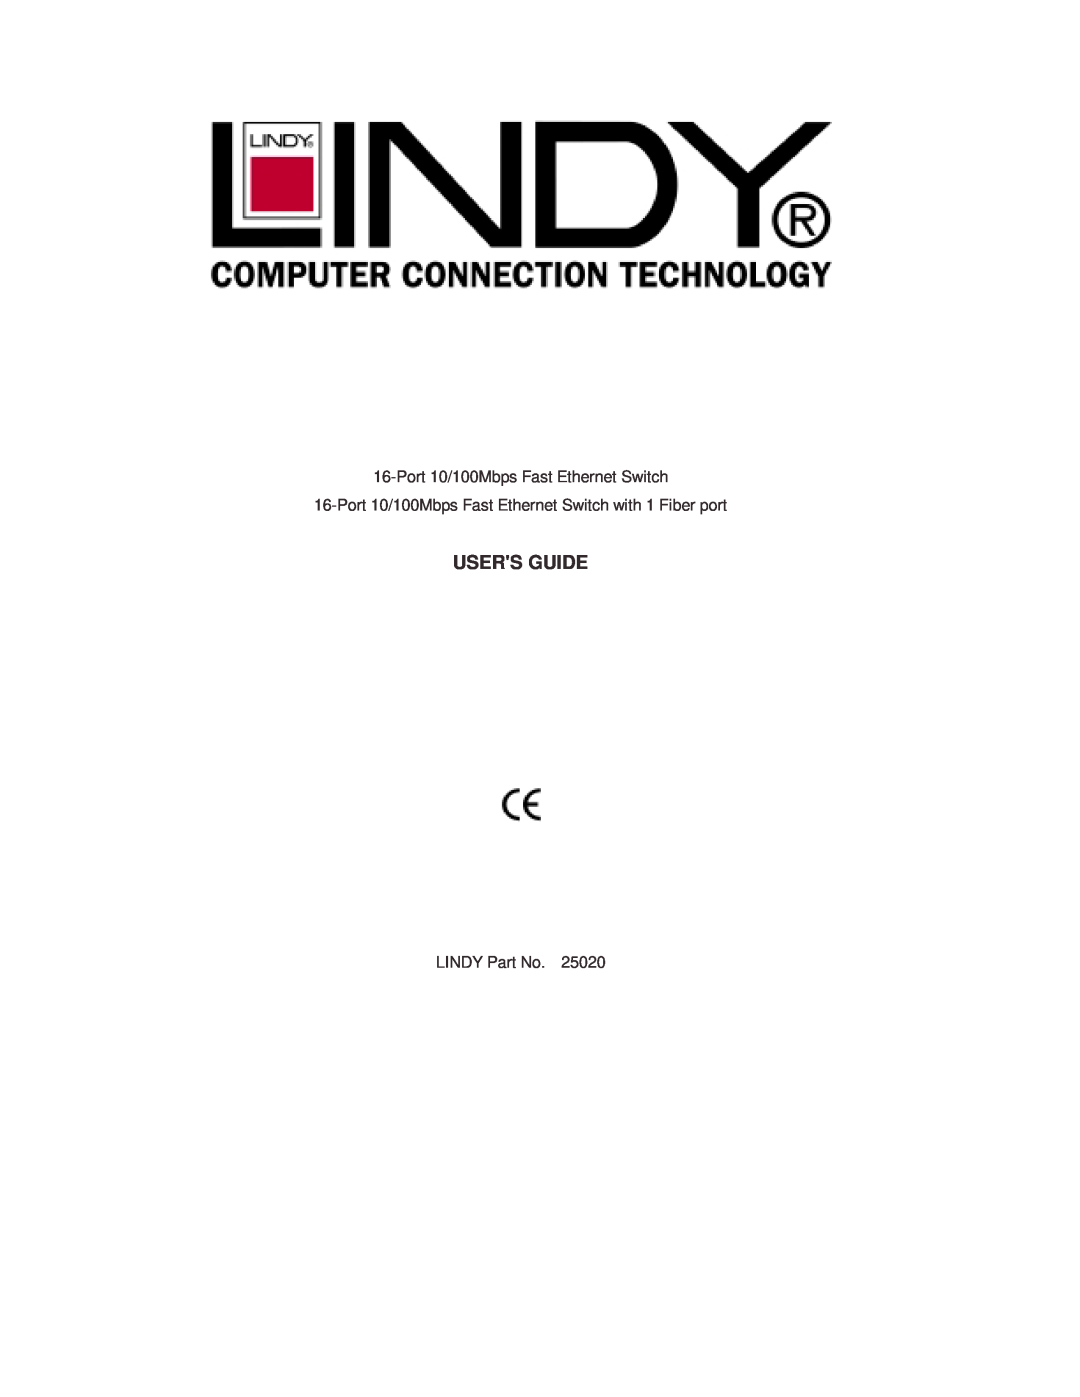 Lindy 25020 manual Users Guide, Port 10/100Mbps Fast Ethernet Switch, LINDY Part No 